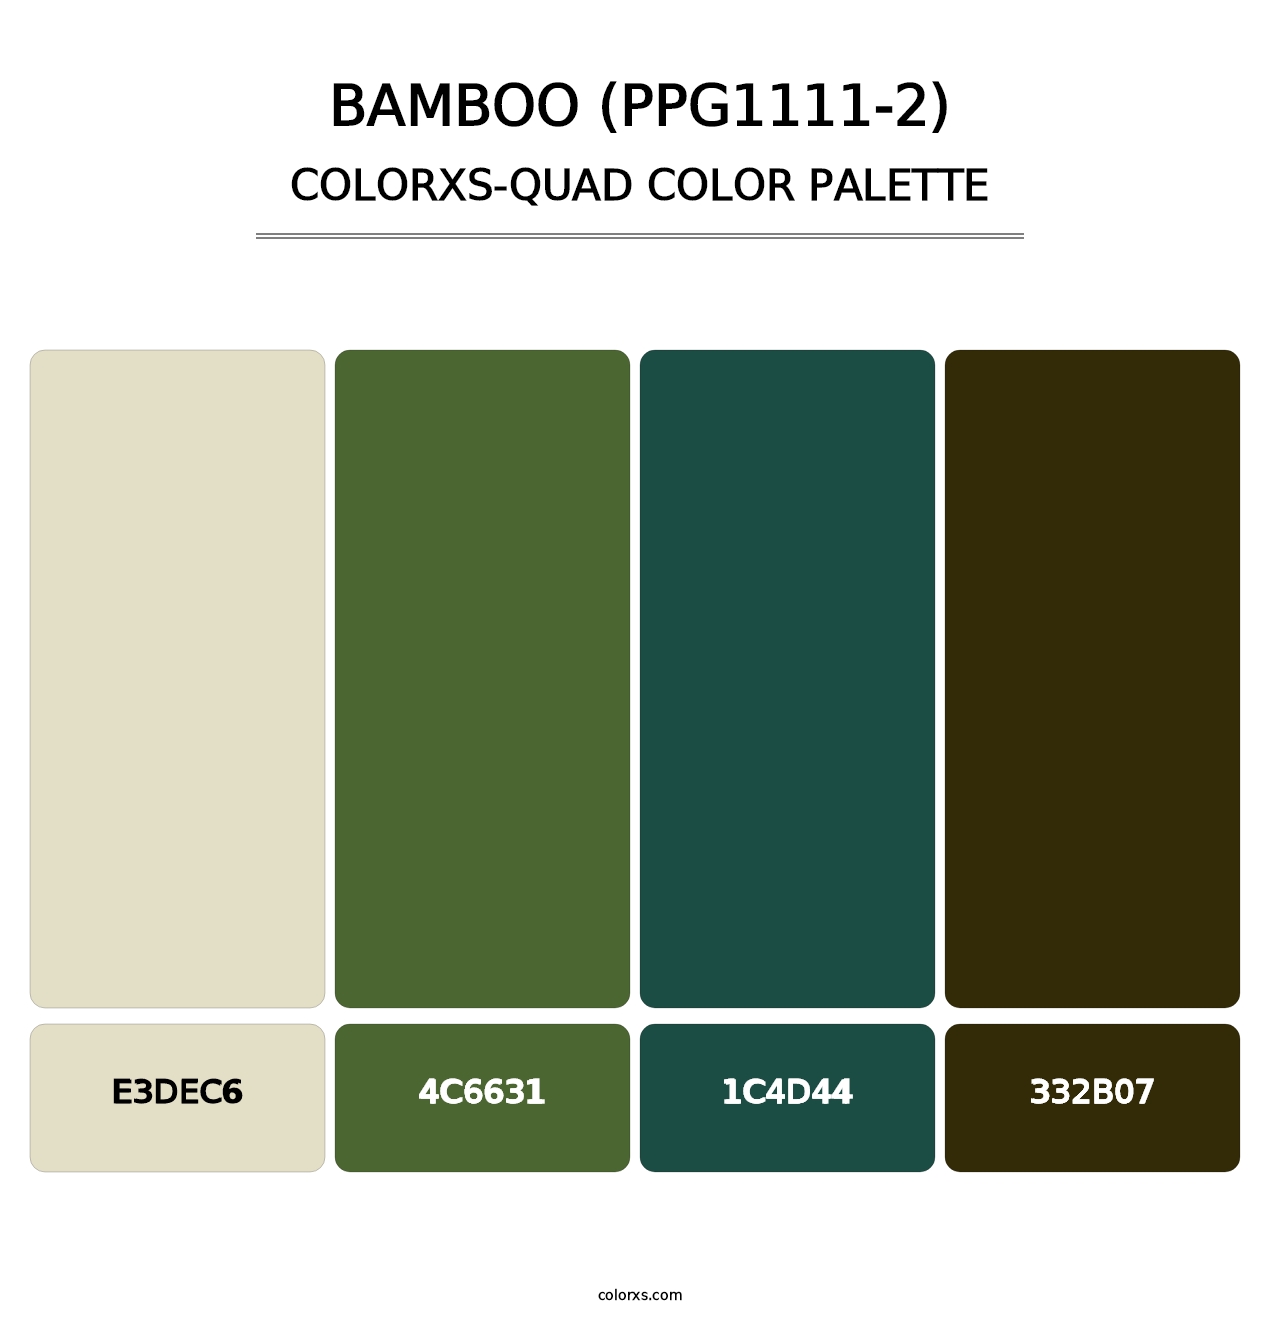 Bamboo (PPG1111-2) - Colorxs Quad Palette